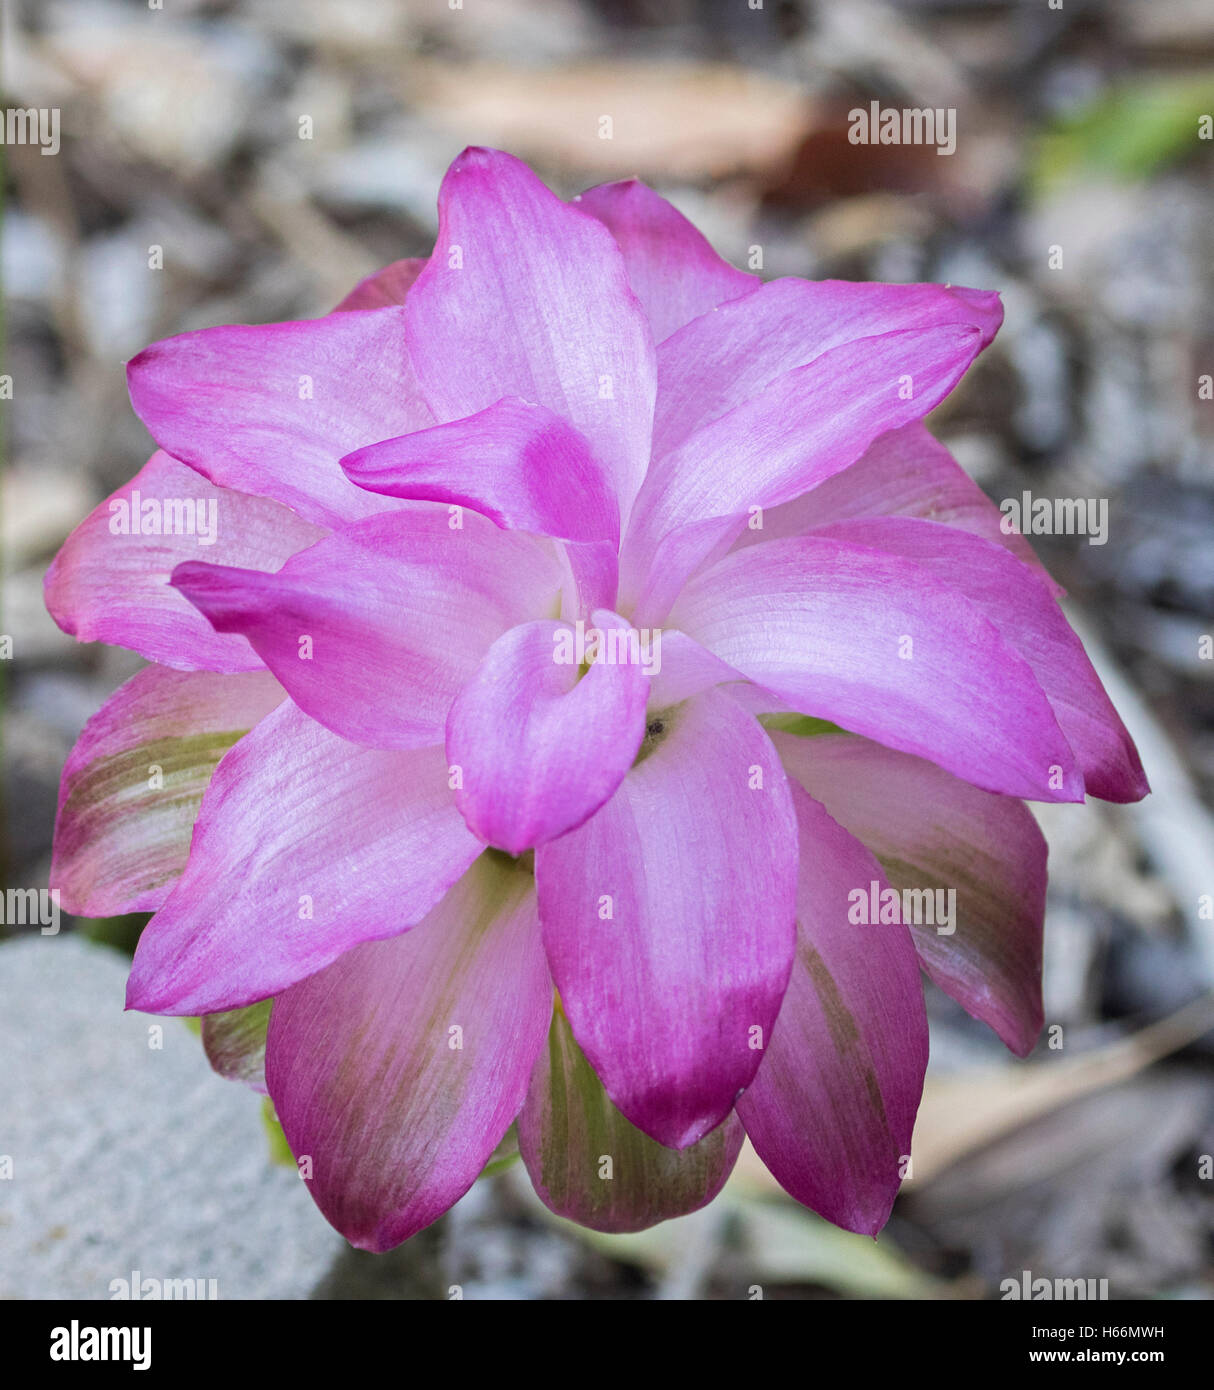 Spectacular bright pink flower of Curcuma species, an ornamental ginger against light grey to brown background Stock Photo